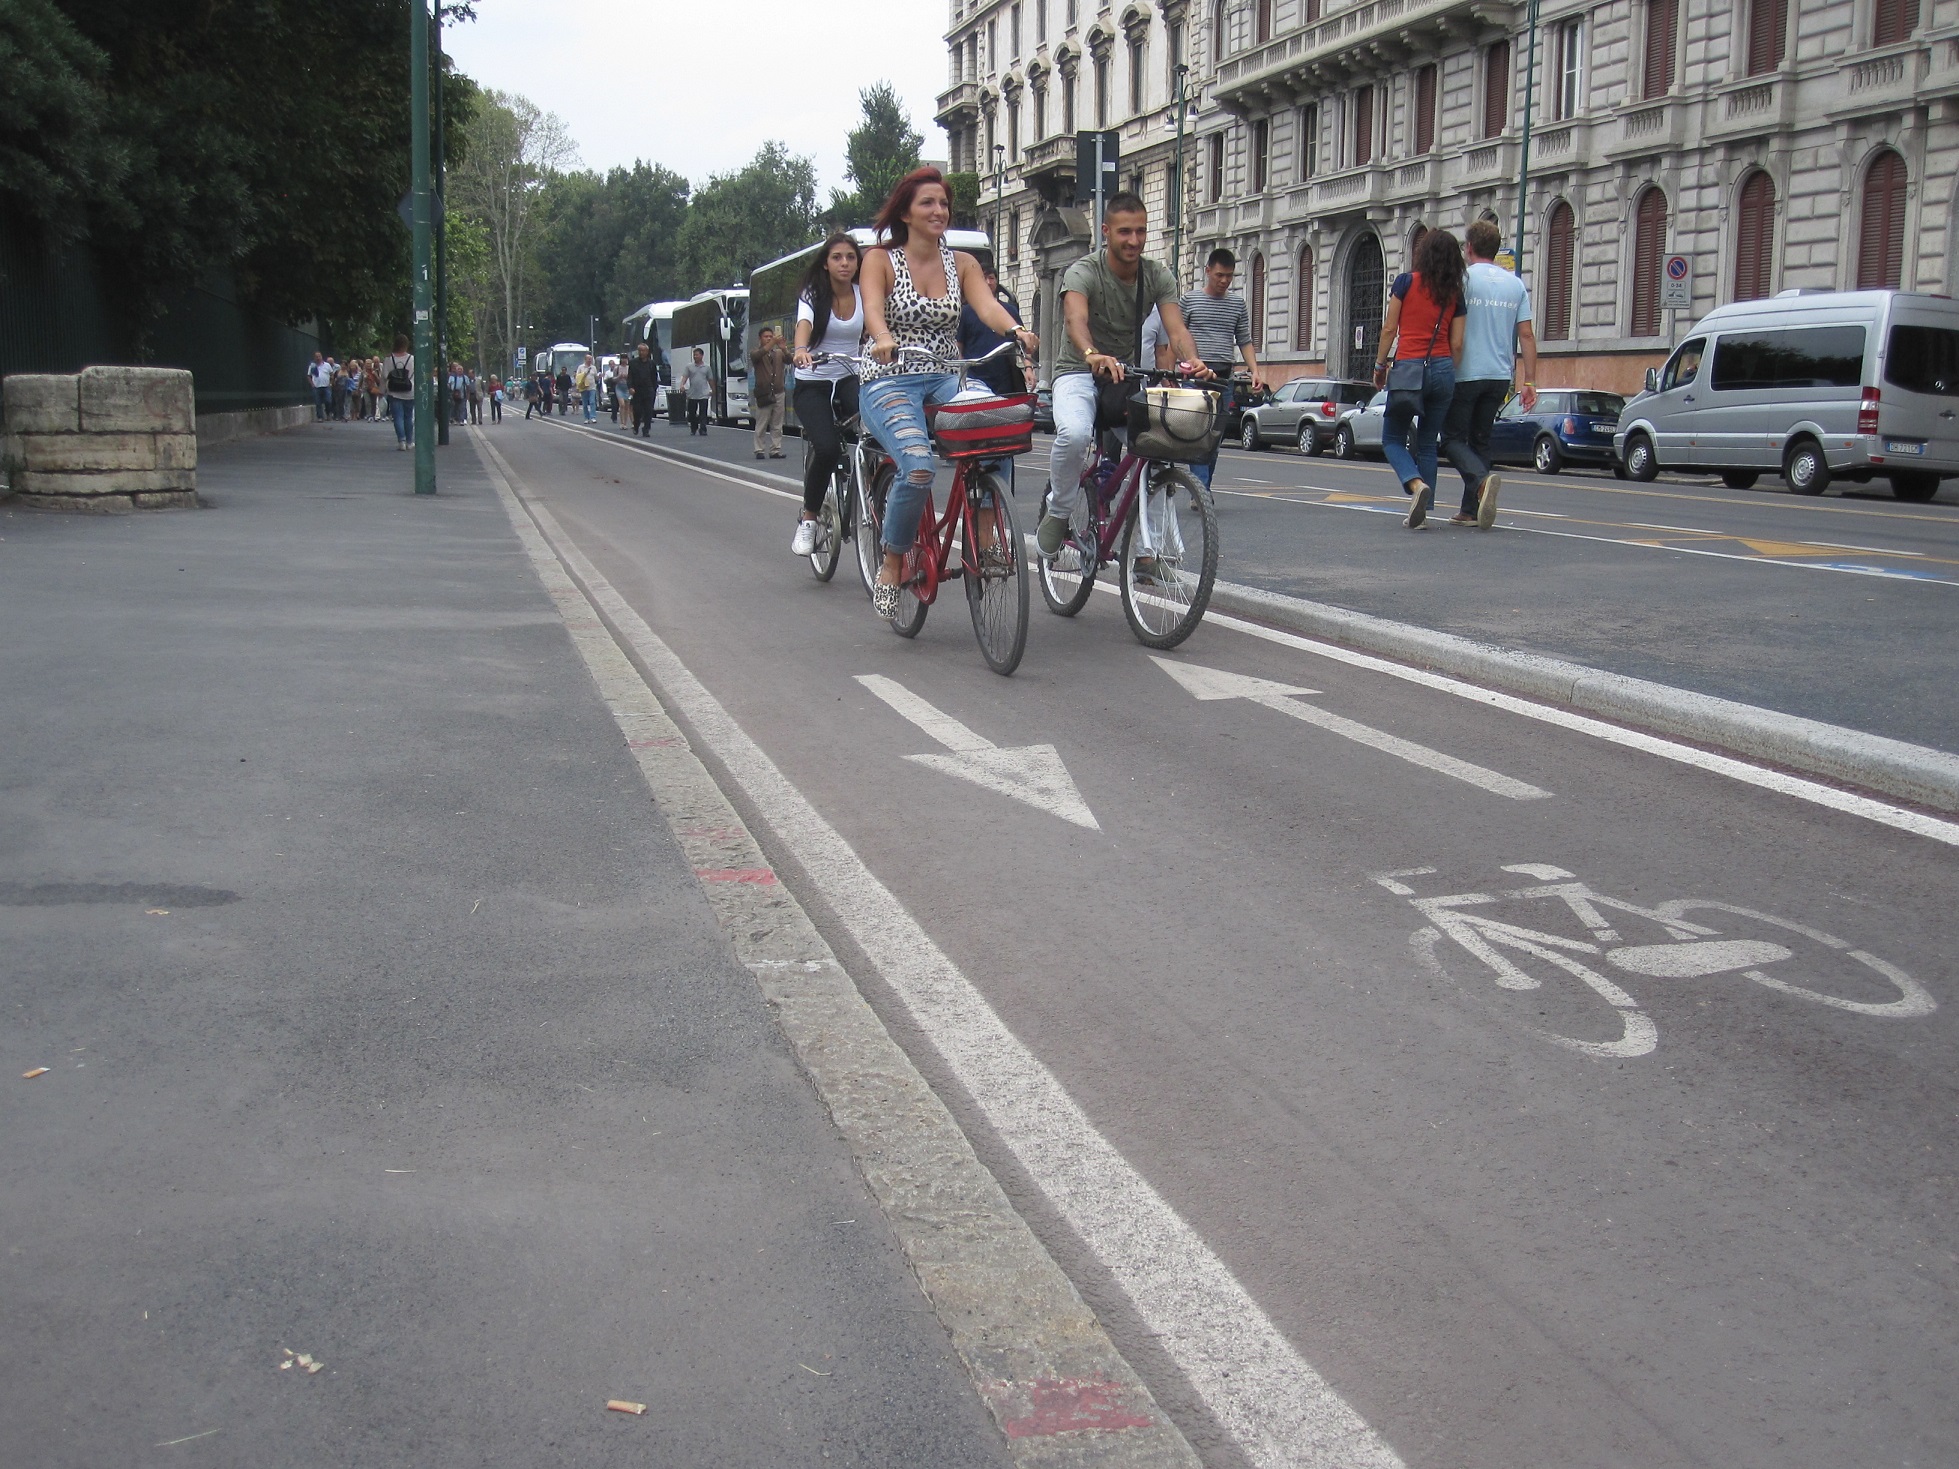 Milan cycling infrastructure investment liveable cities 15-minute city decarbonisation © David Arminas | World Highways